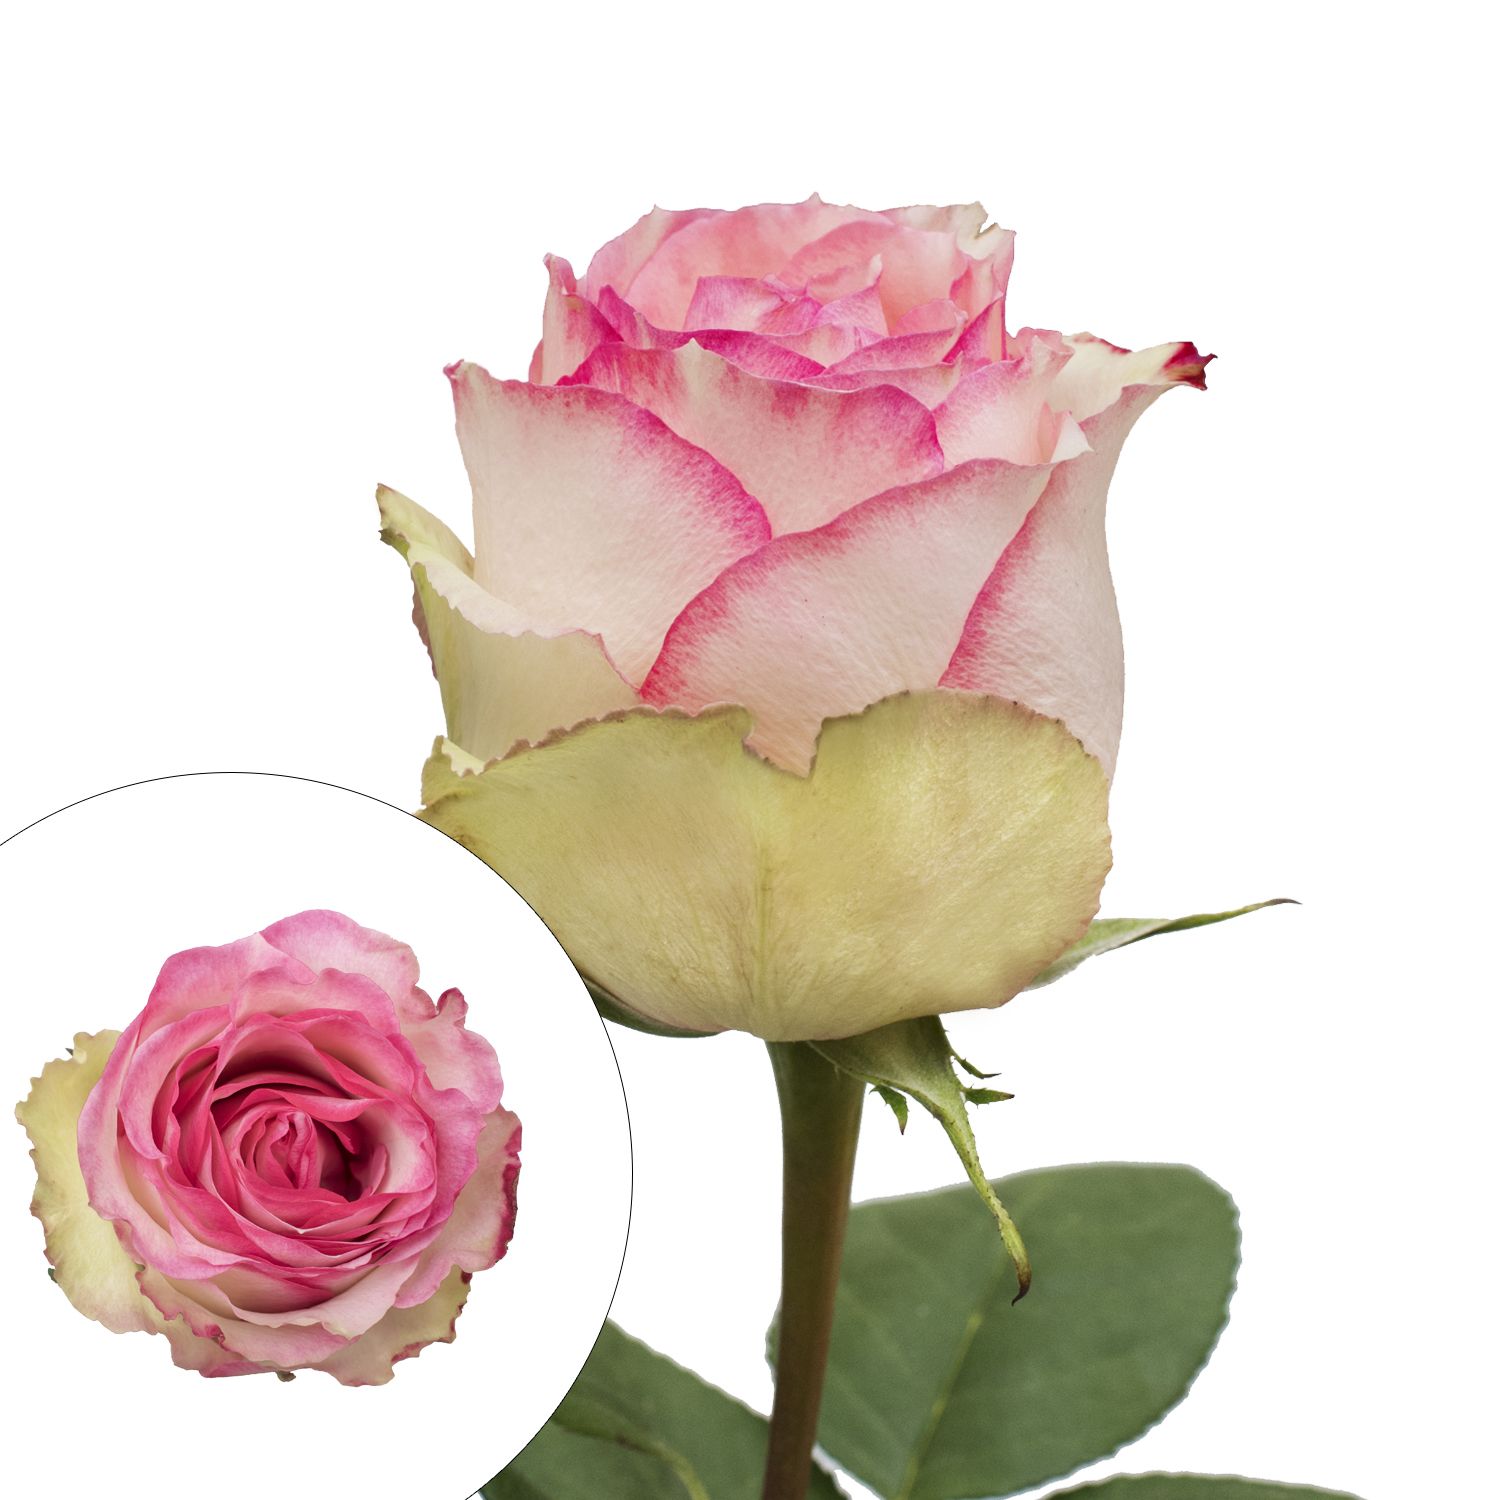 Rainforest Alliance Certified Roses - White/Pink | BJ's Wholesale Club